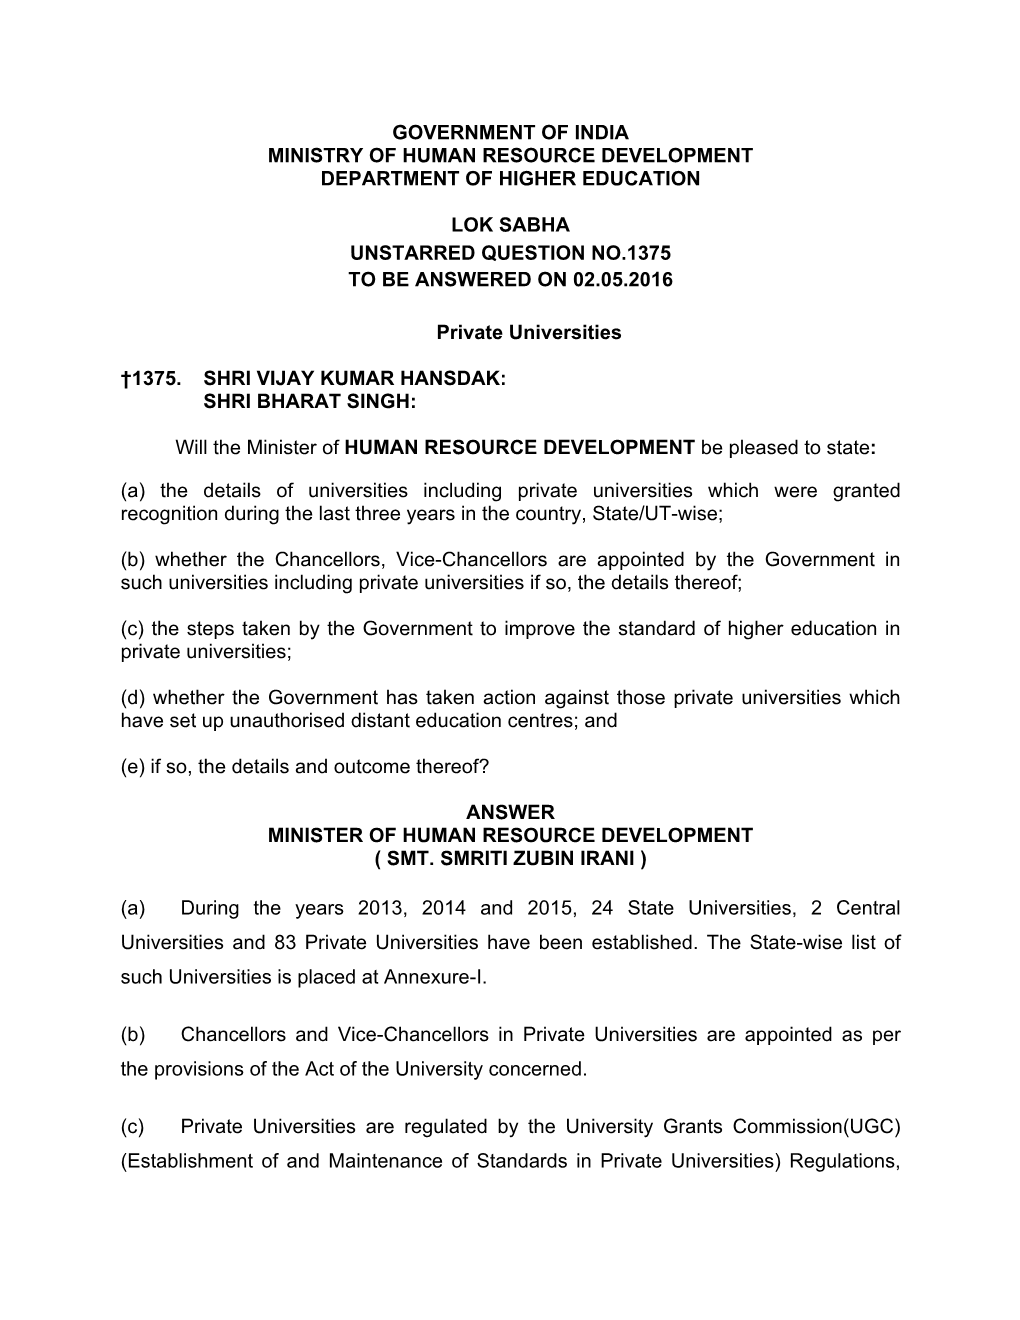 Government of India Ministry of Human Resource Development Department of Higher Education